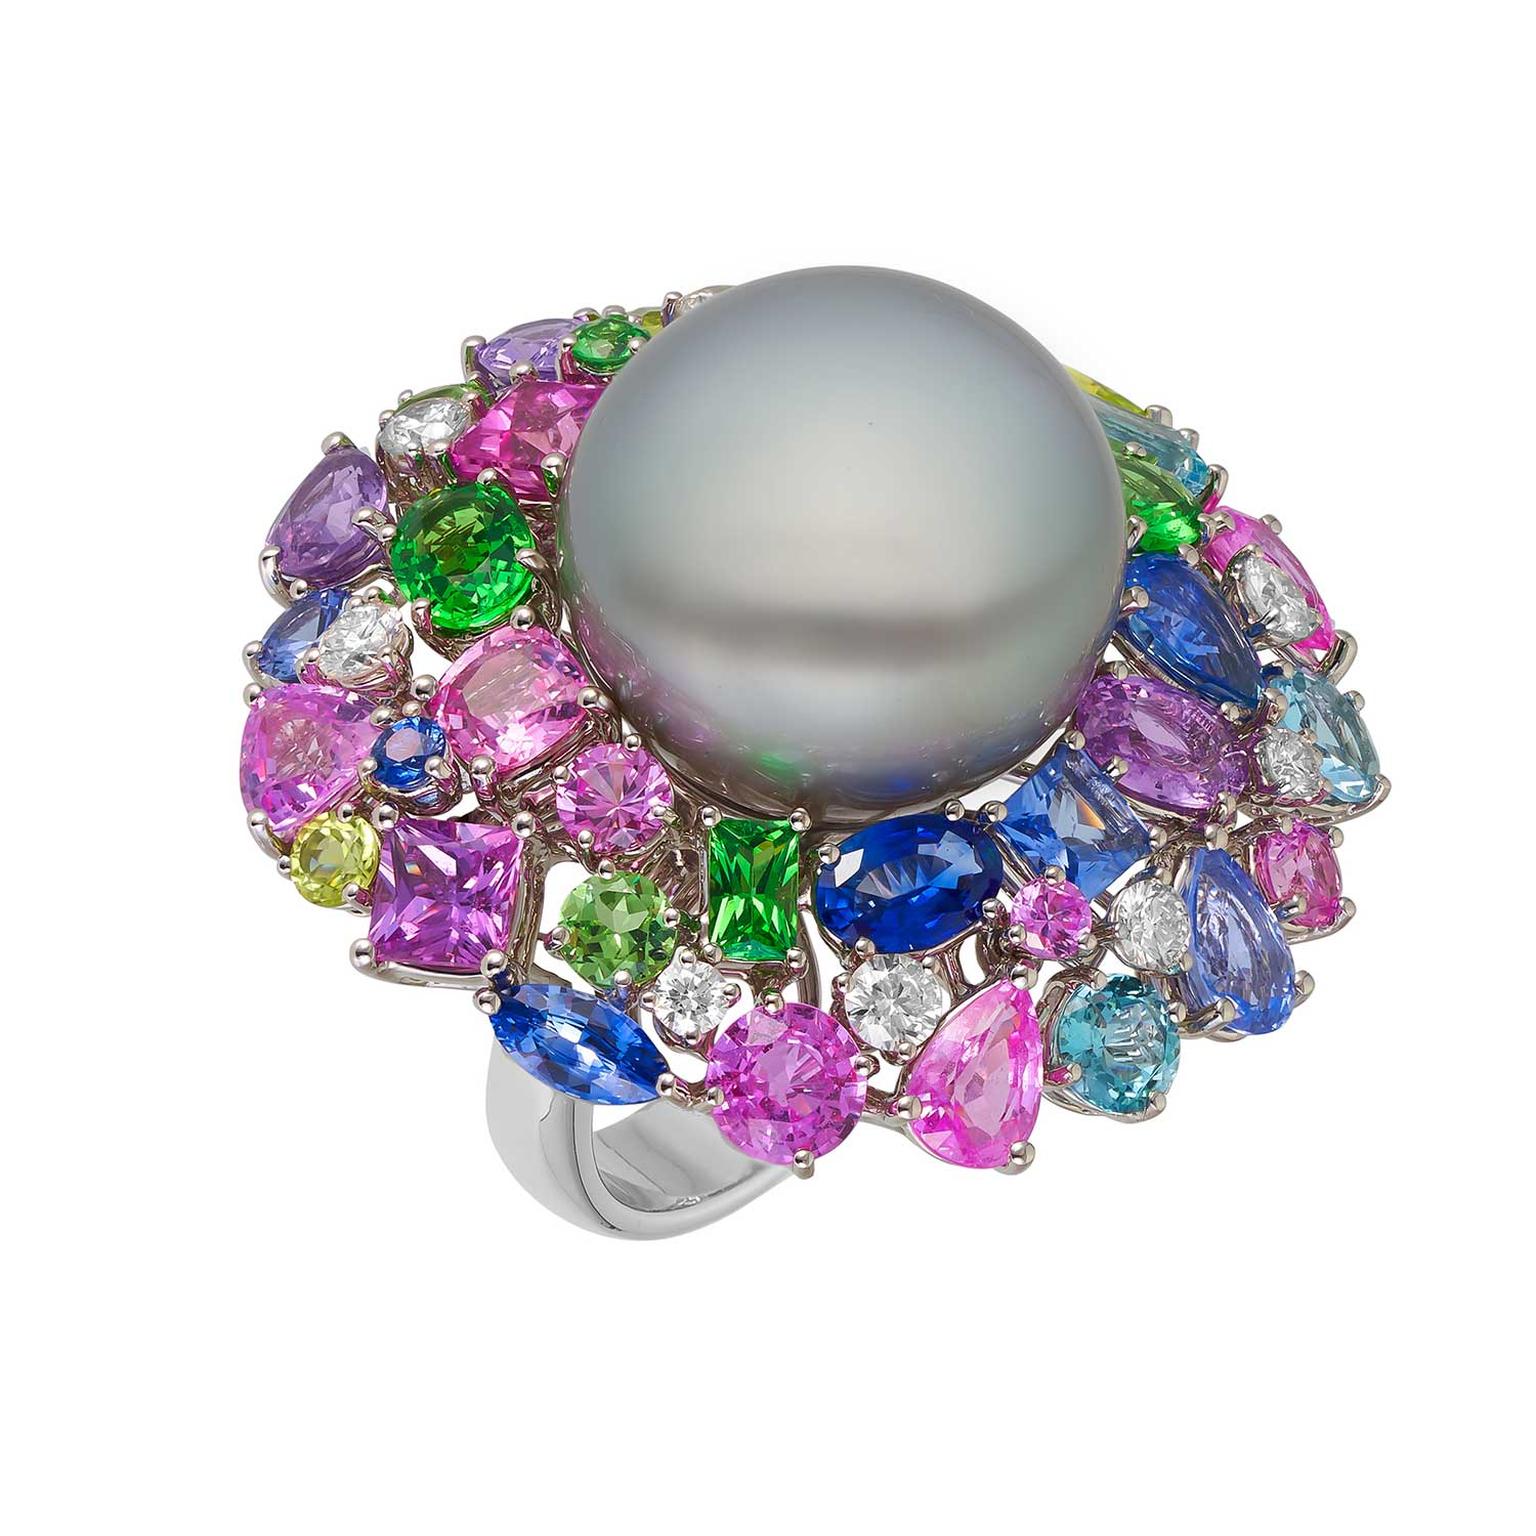 Margot McKinney Hibiscus Tahitian pearl cocktail ring with multi-coloured gemstones and diamonds